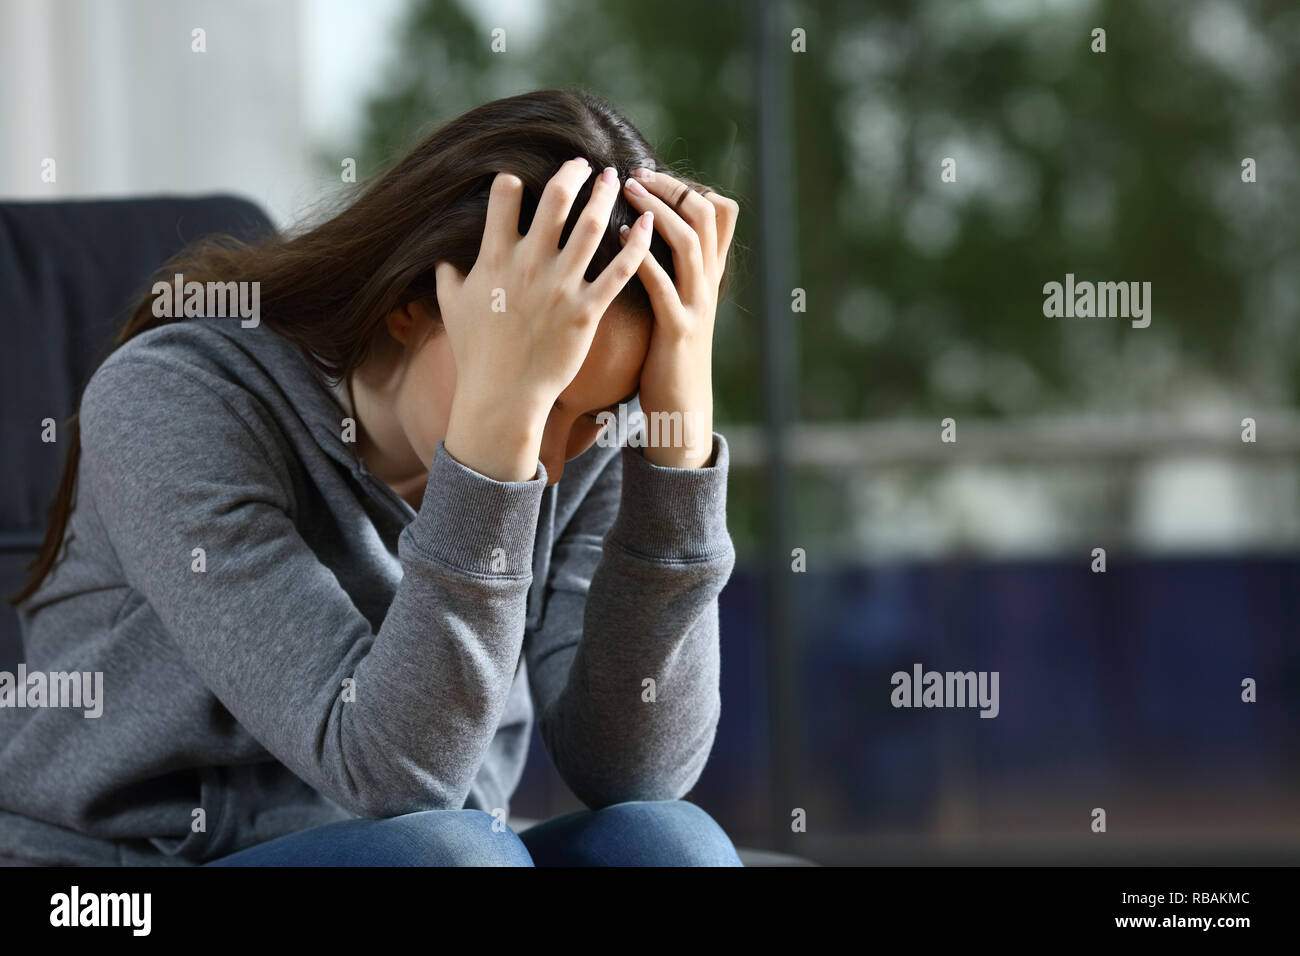 Sad woman complaining alone sitting on a couch at home Stock Photo